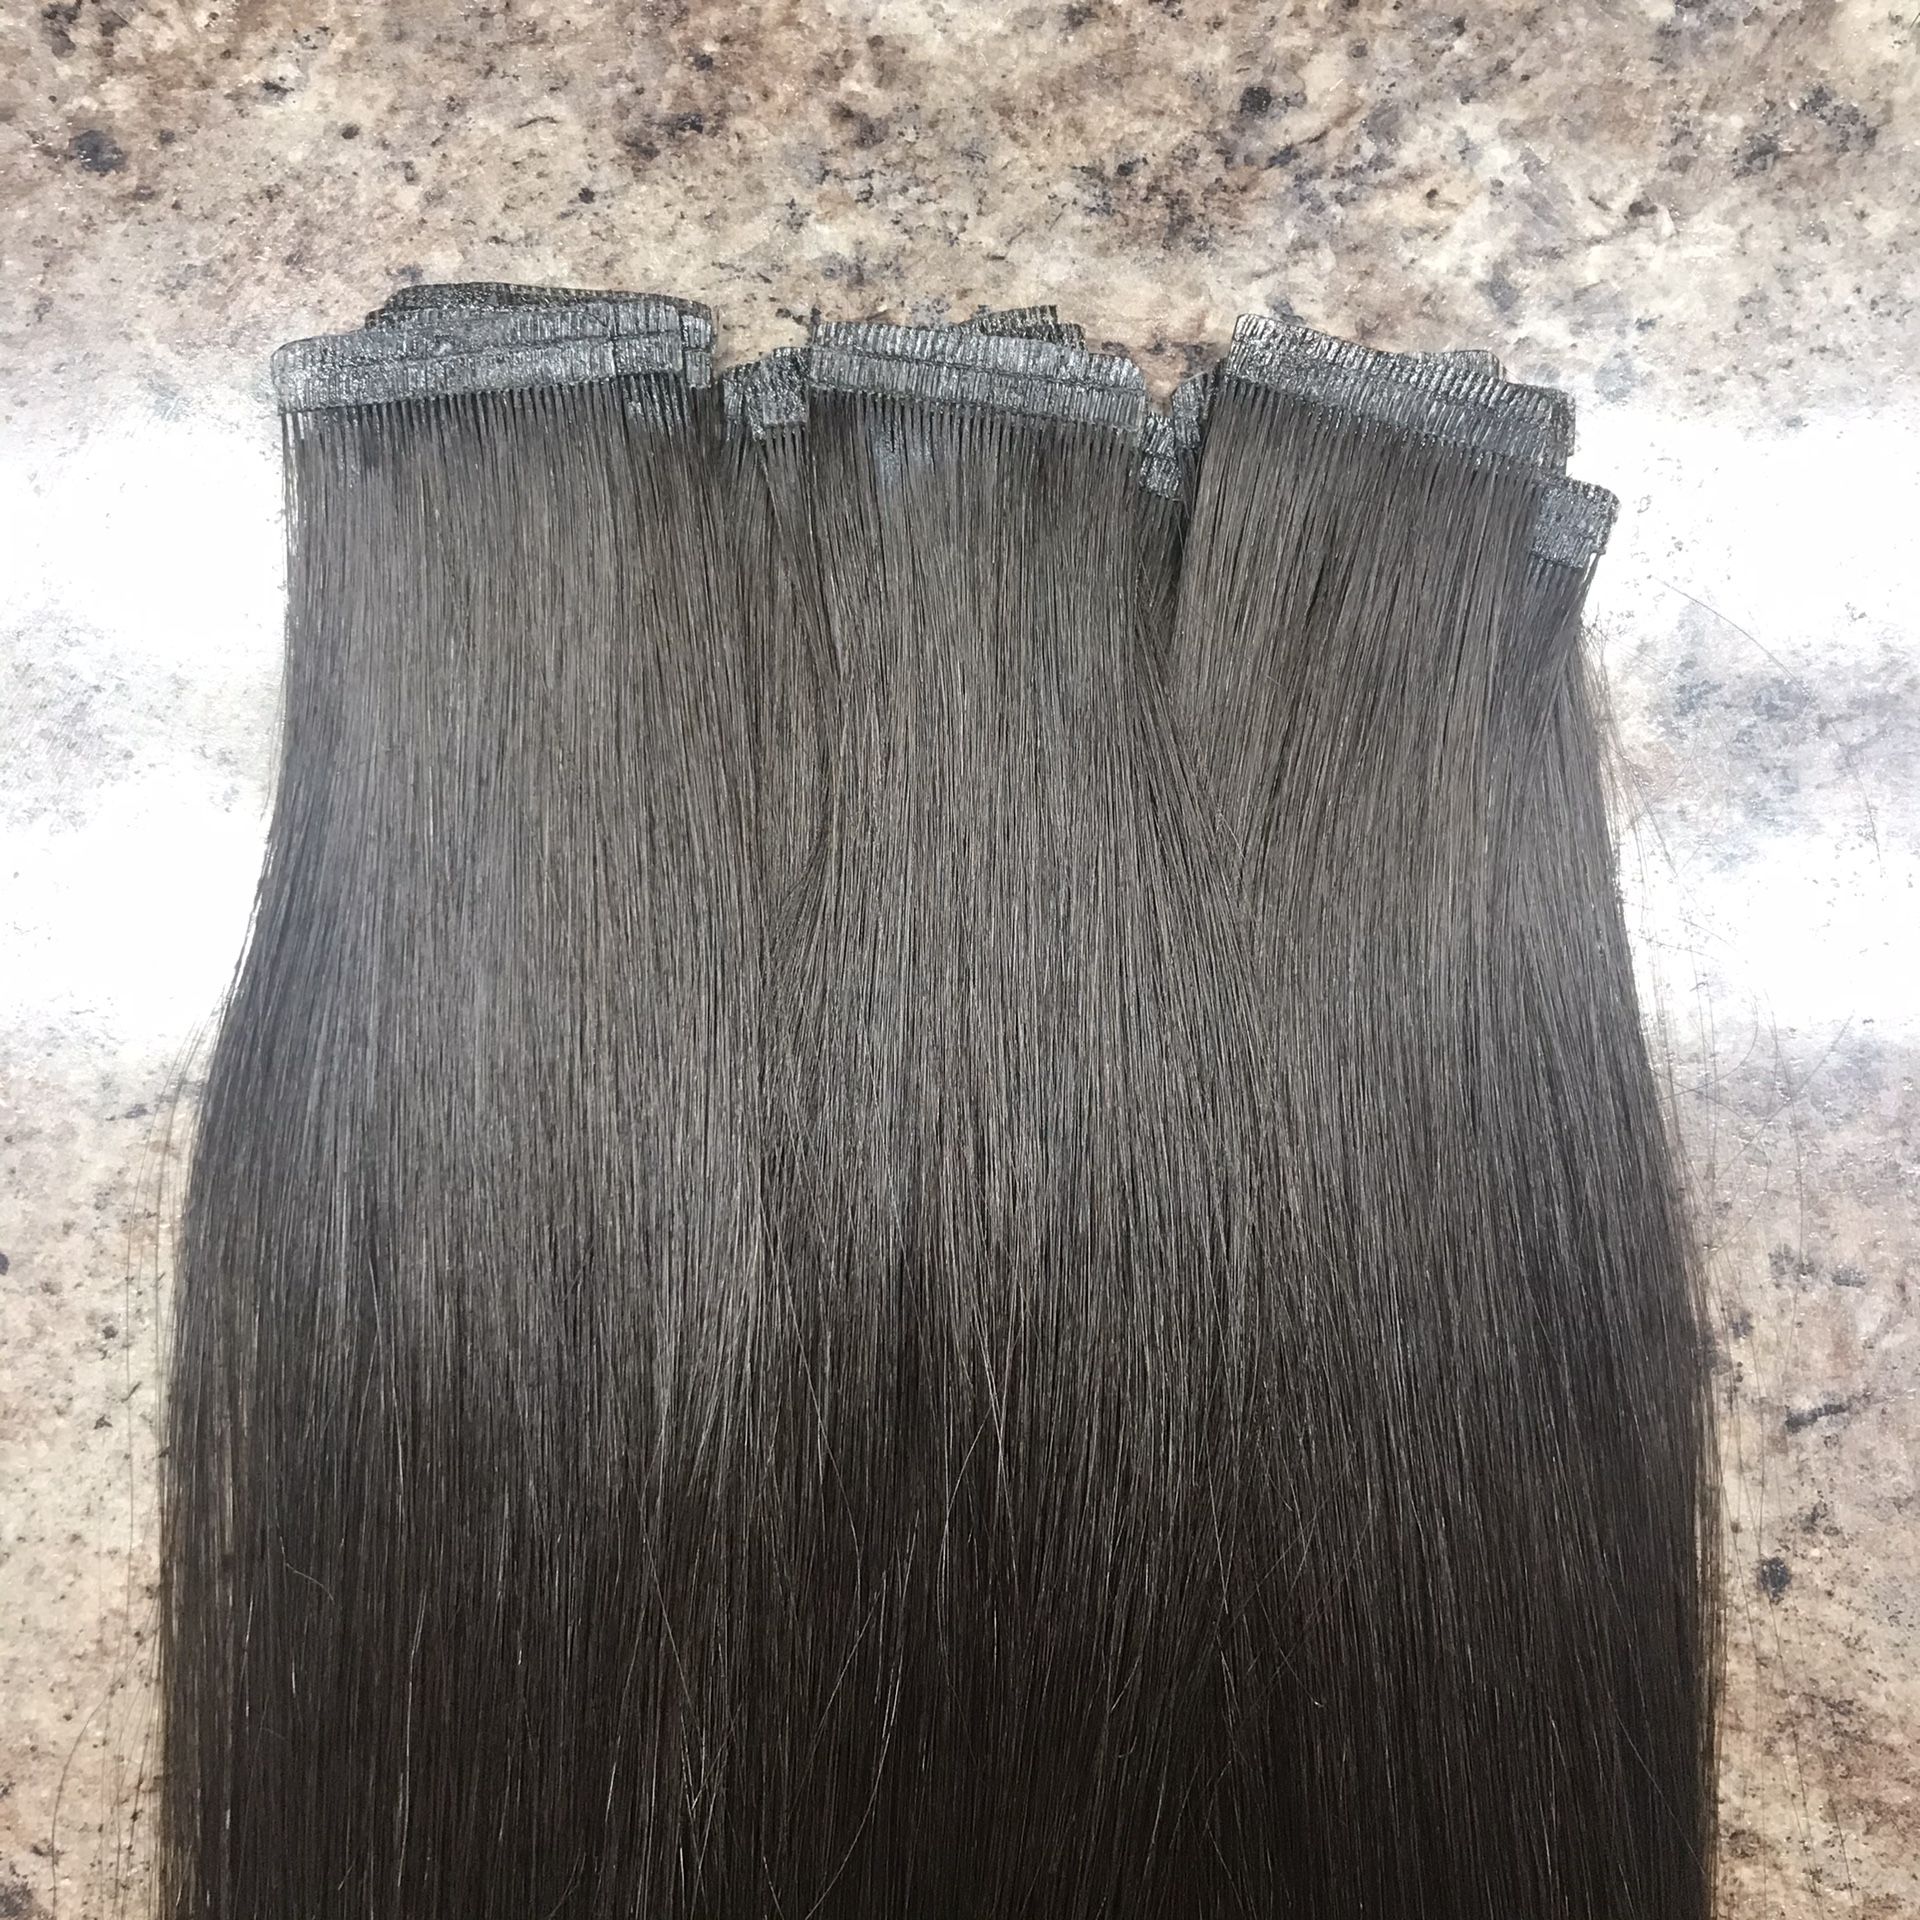 18” Donna Bella Tape-In Hair Extensions